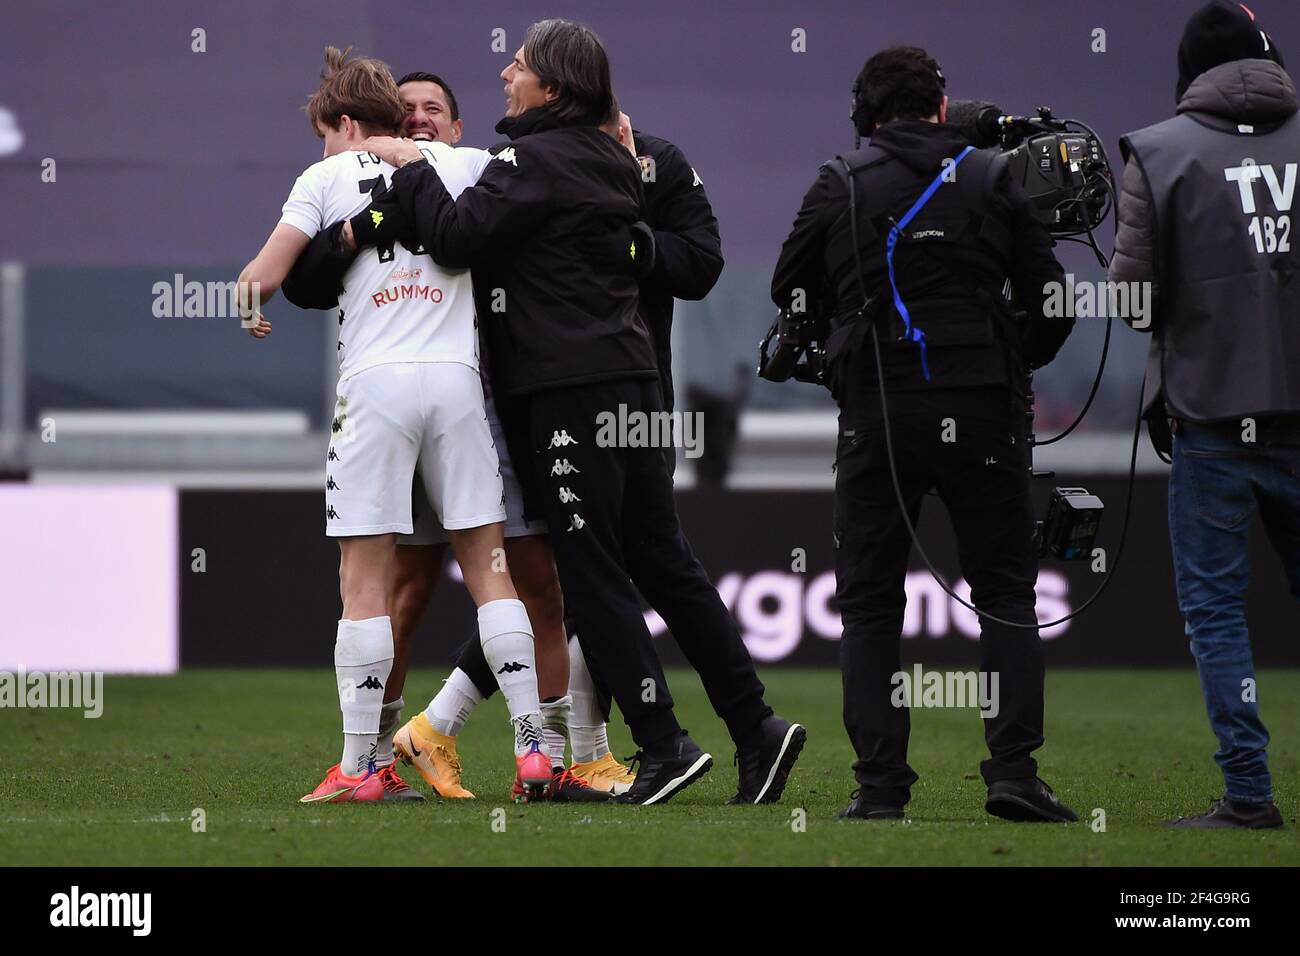 Turin, Italy. 21st Mar, 2021. Benevento players celebrate with Filippo Inzaghi coach of Benevento Calcio at the end of the Serie A football match between Juventus FC and Benevento Calcio at Allianz stadium in Torino (Italy), March 21th, 2021. Photo Federico Tardito/Insidefoto Credit: insidefoto srl/Alamy Live News Stock Photo